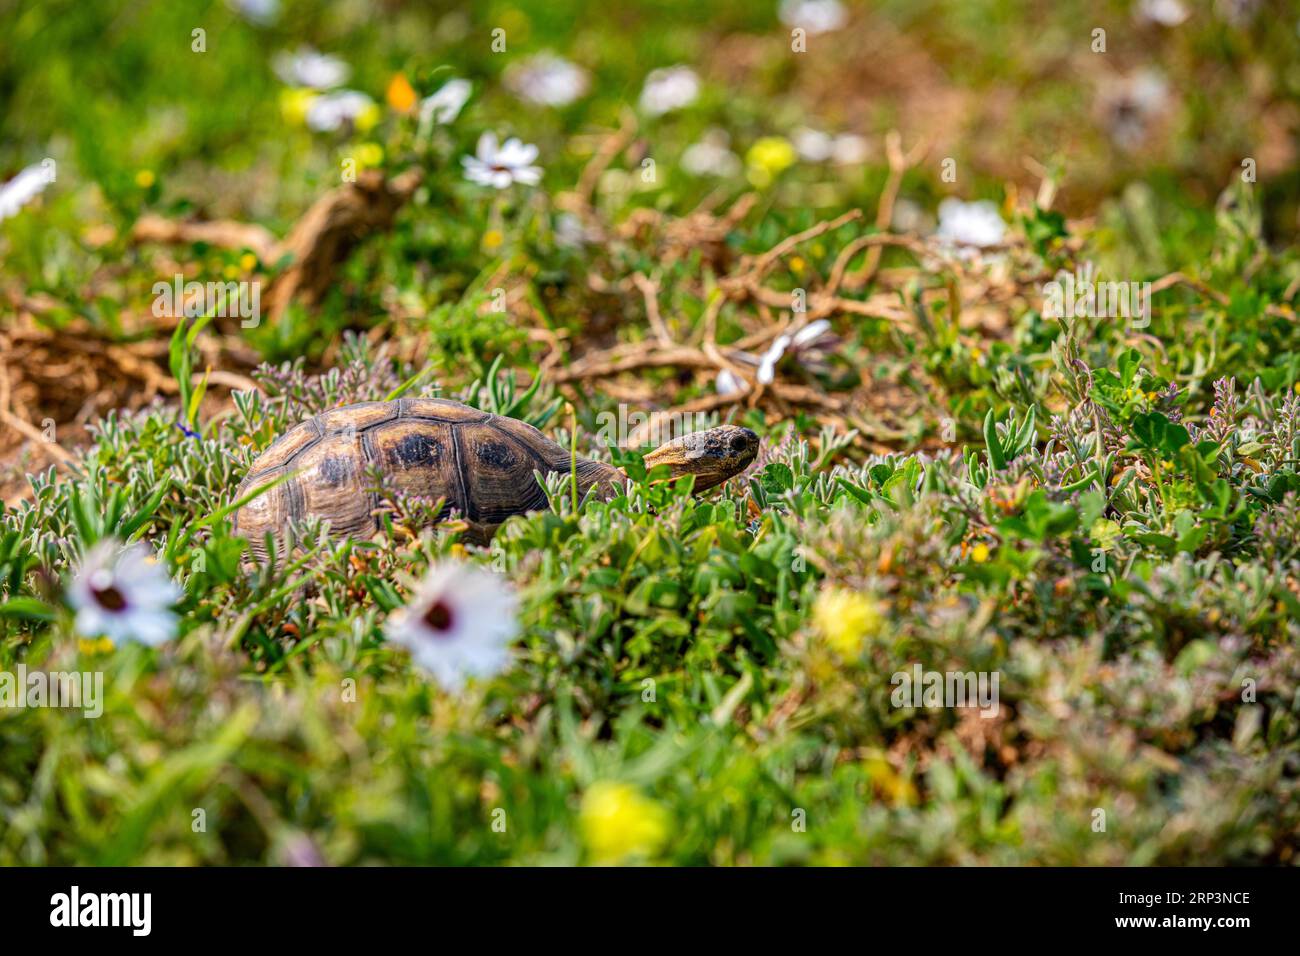 Angulate tortoise at West Cape National Park, Western Province, South Africa Stock Photo